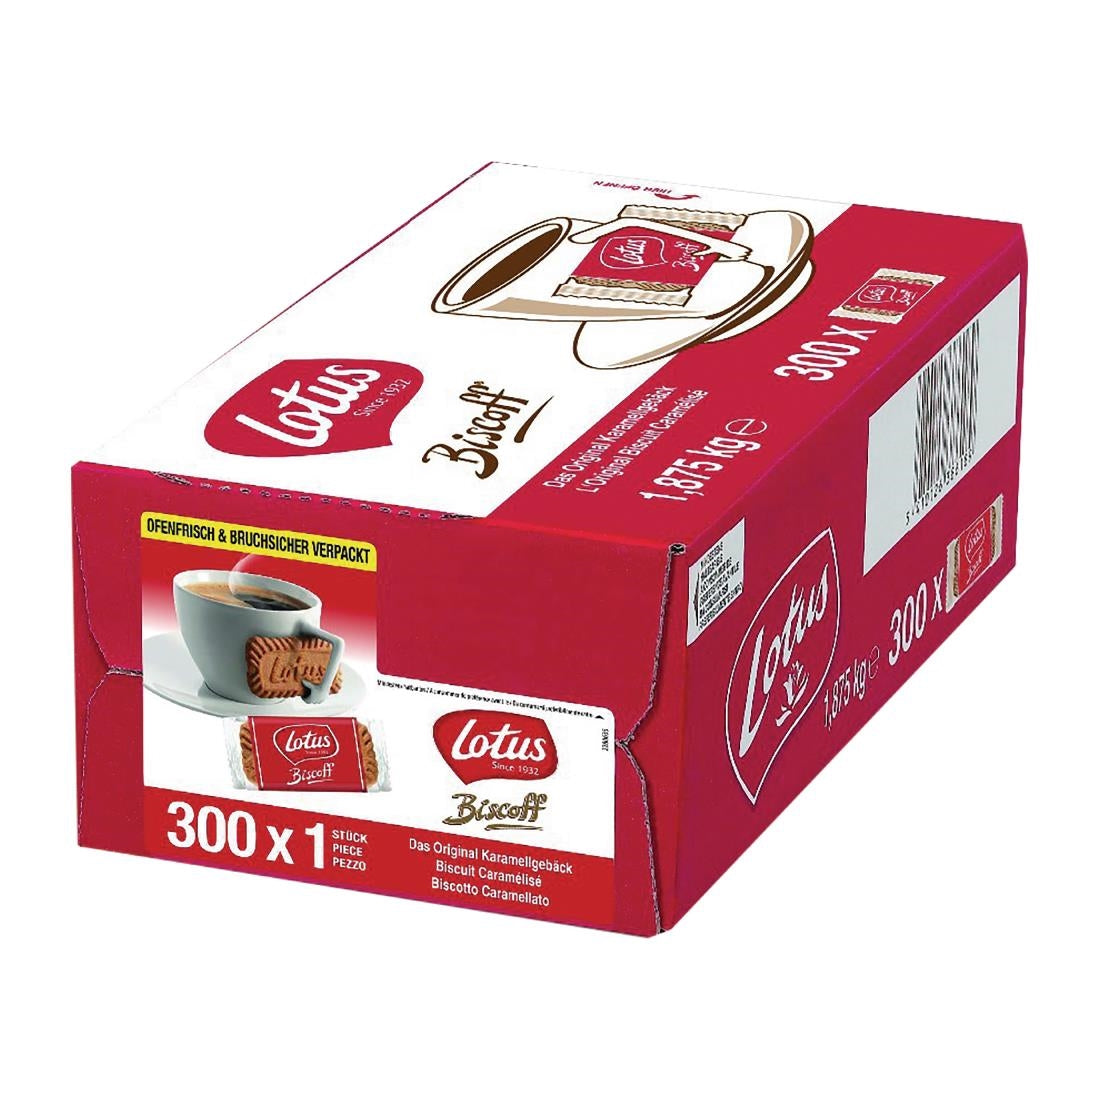 FW986 Lotus Biscoff Caramelised Biscuits (Pack of 300) JD Catering Equipment Solutions Ltd